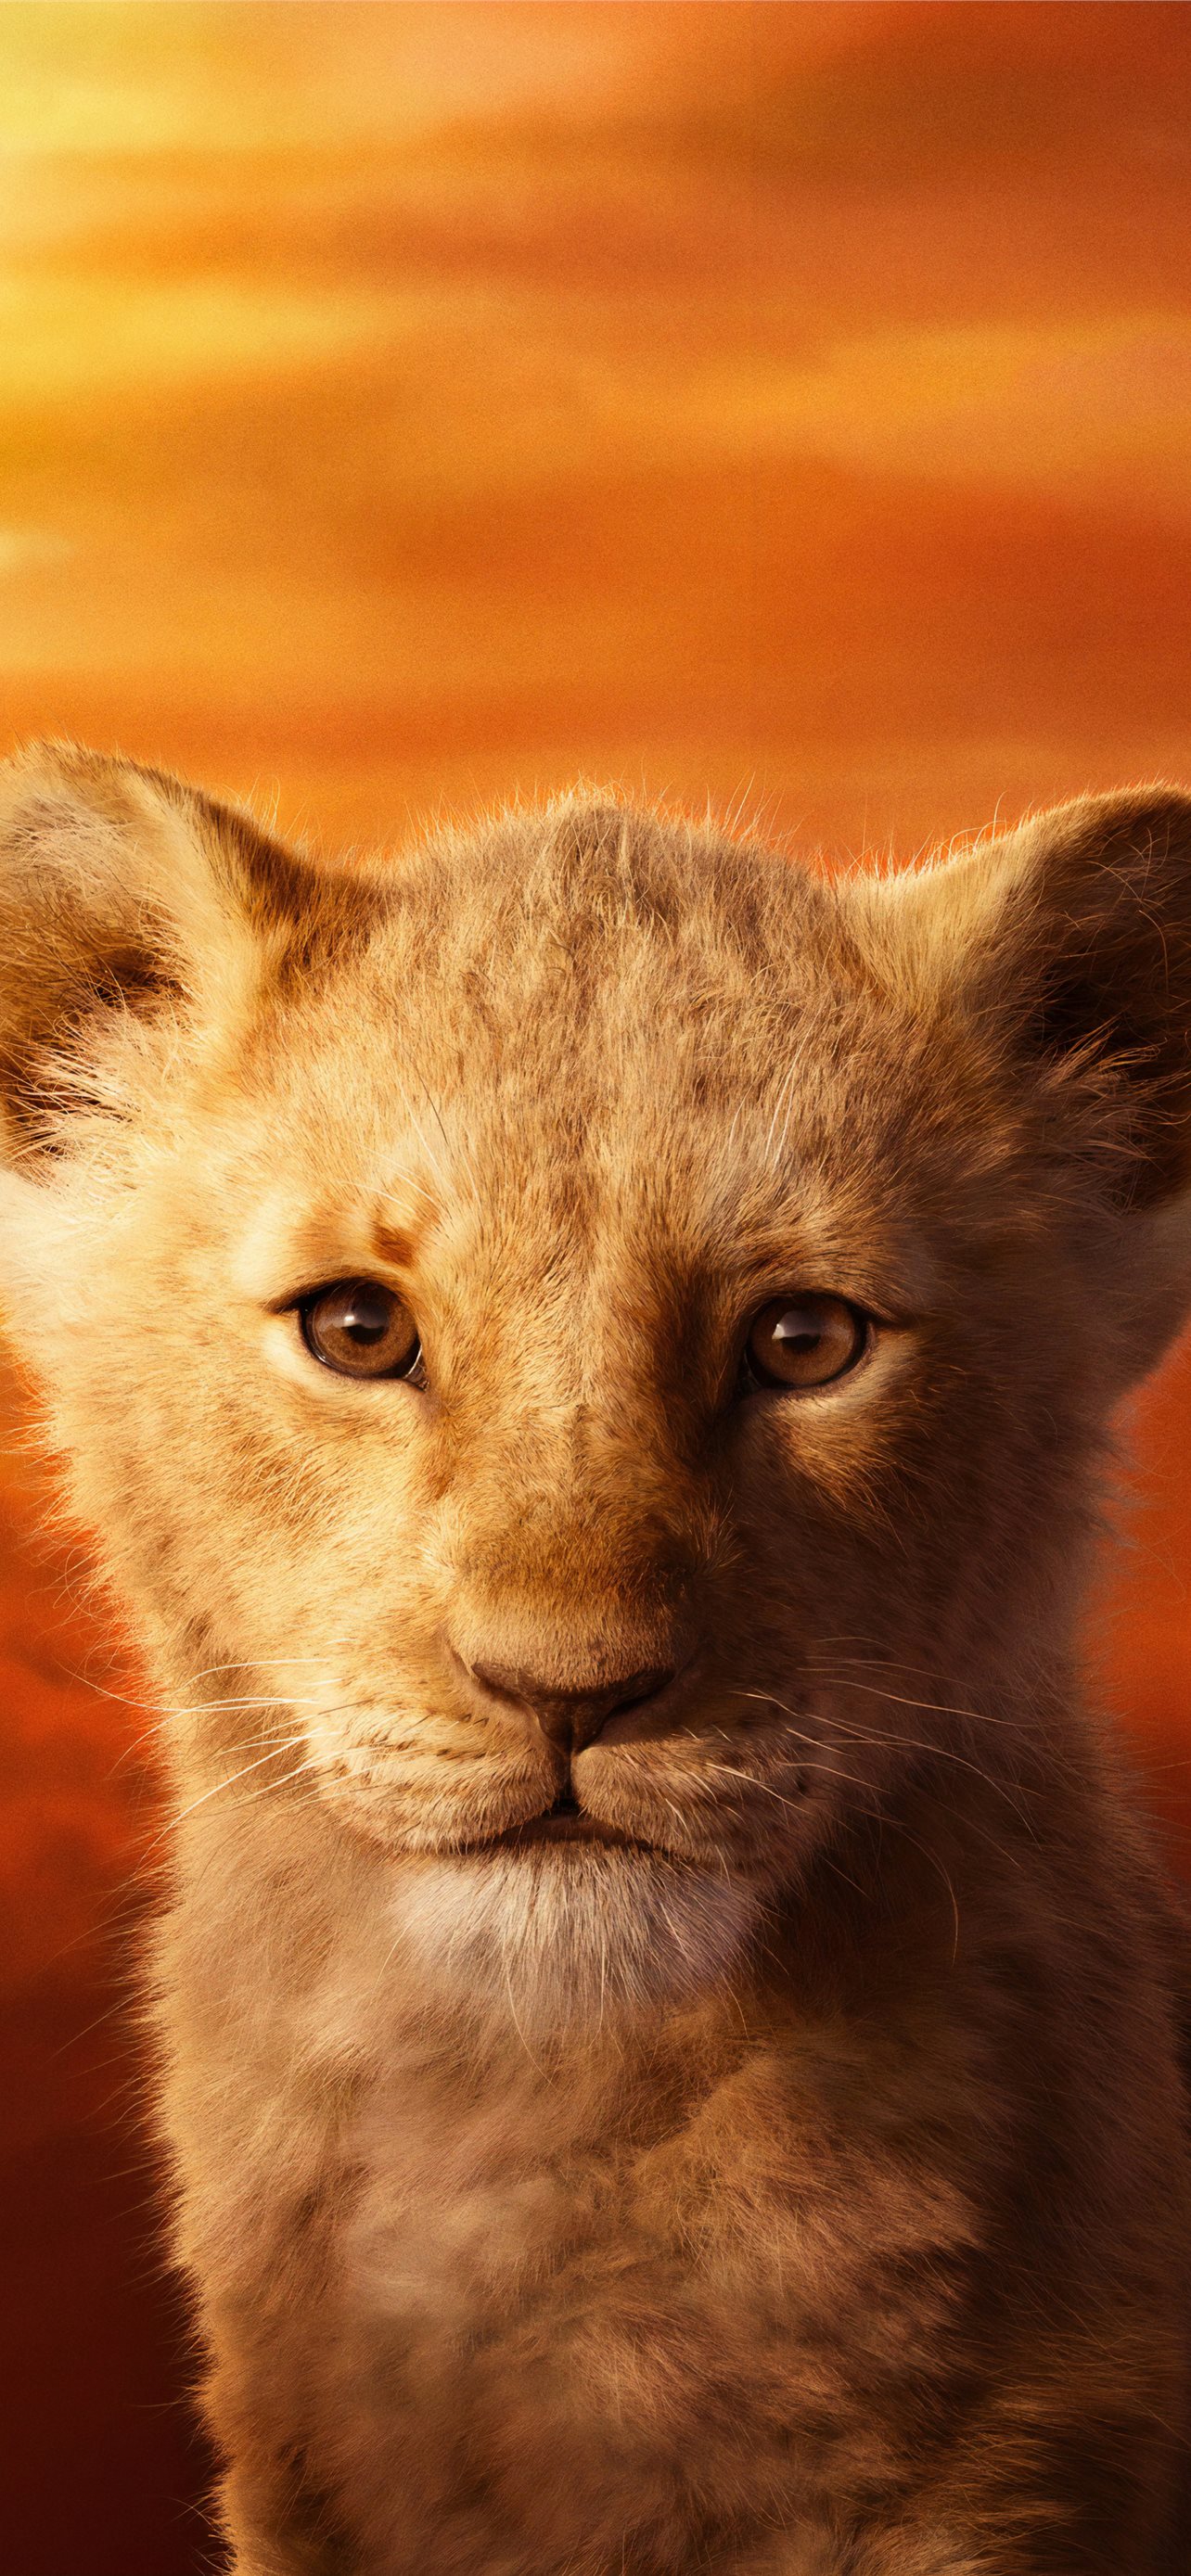 Best The lion king iPhone HD Wallpapers - iLikeWallpaper